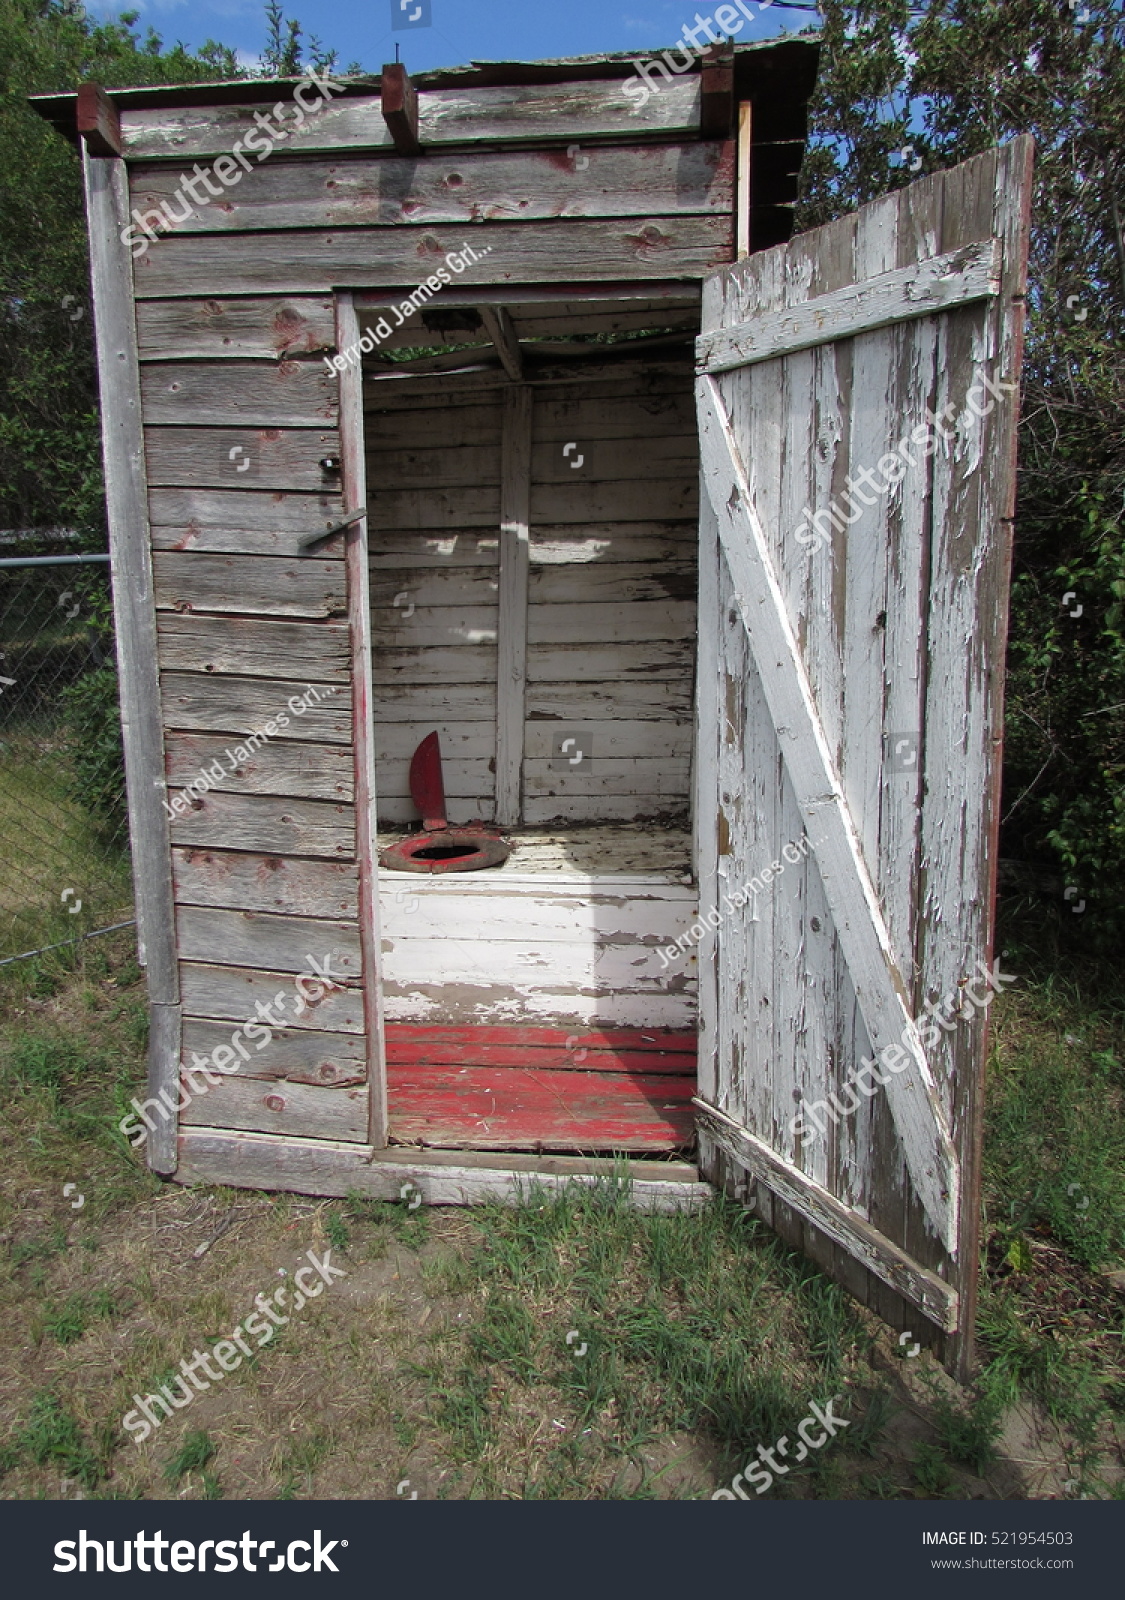 Vintage Wooden Shed or Alley or Outhouse Door